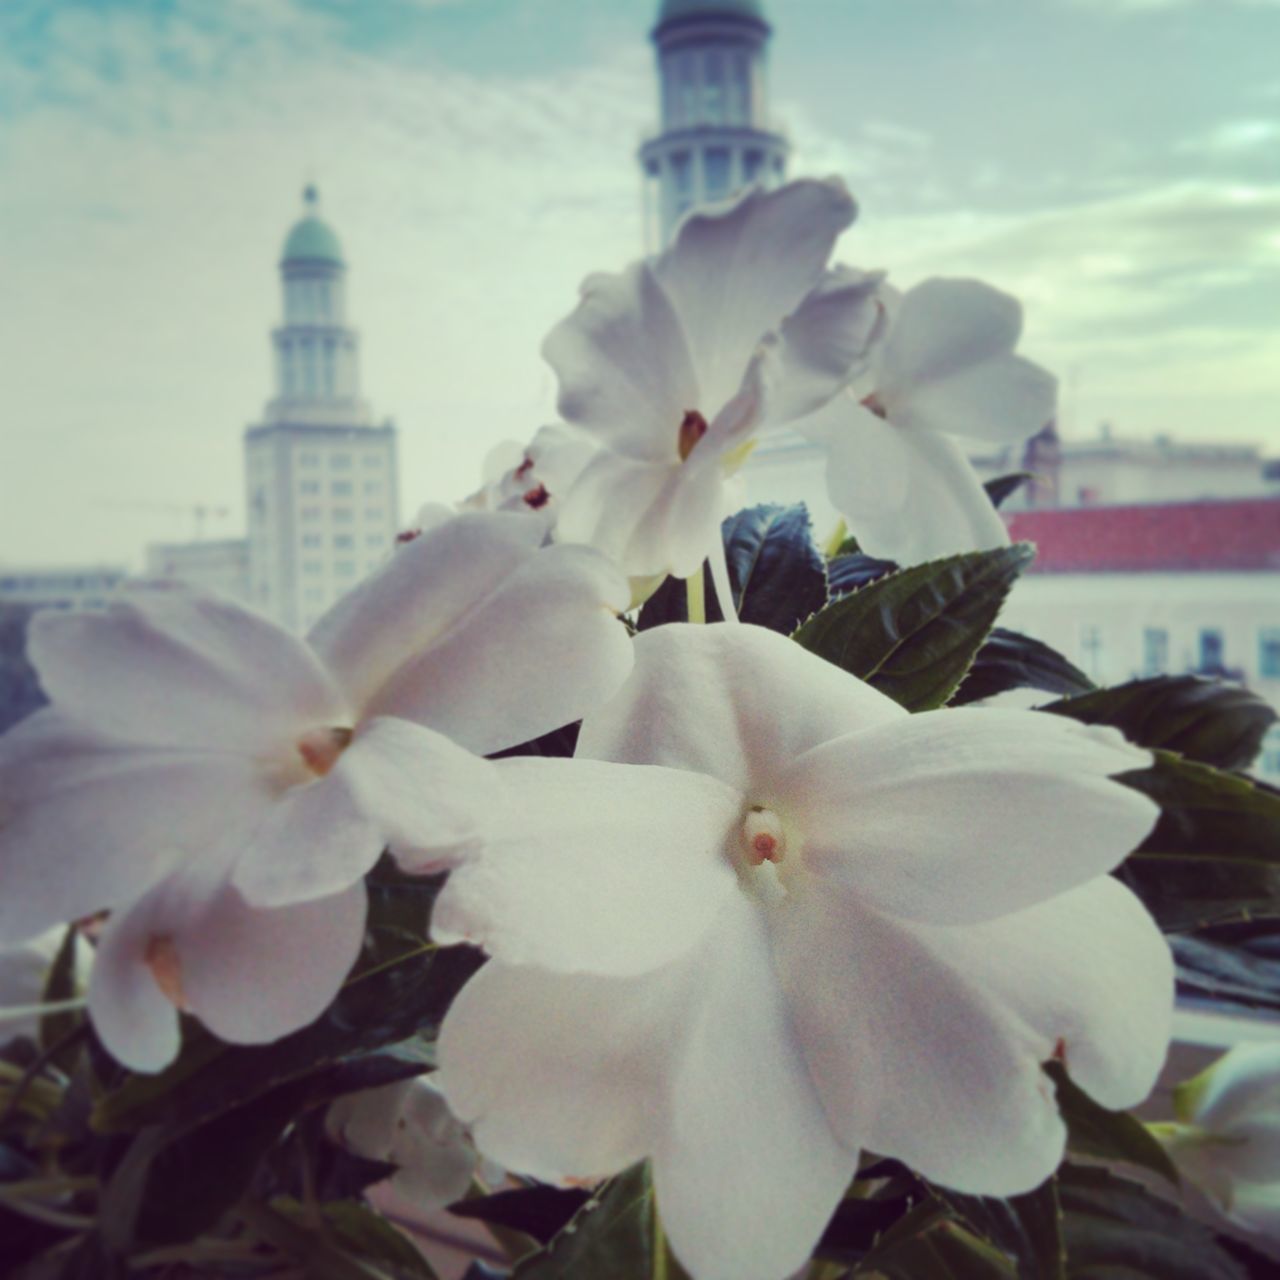 flower, freshness, fragility, petal, building exterior, white color, growth, flower head, built structure, architecture, focus on foreground, sky, blooming, close-up, city, day, in bloom, beauty in nature, nature, blossom